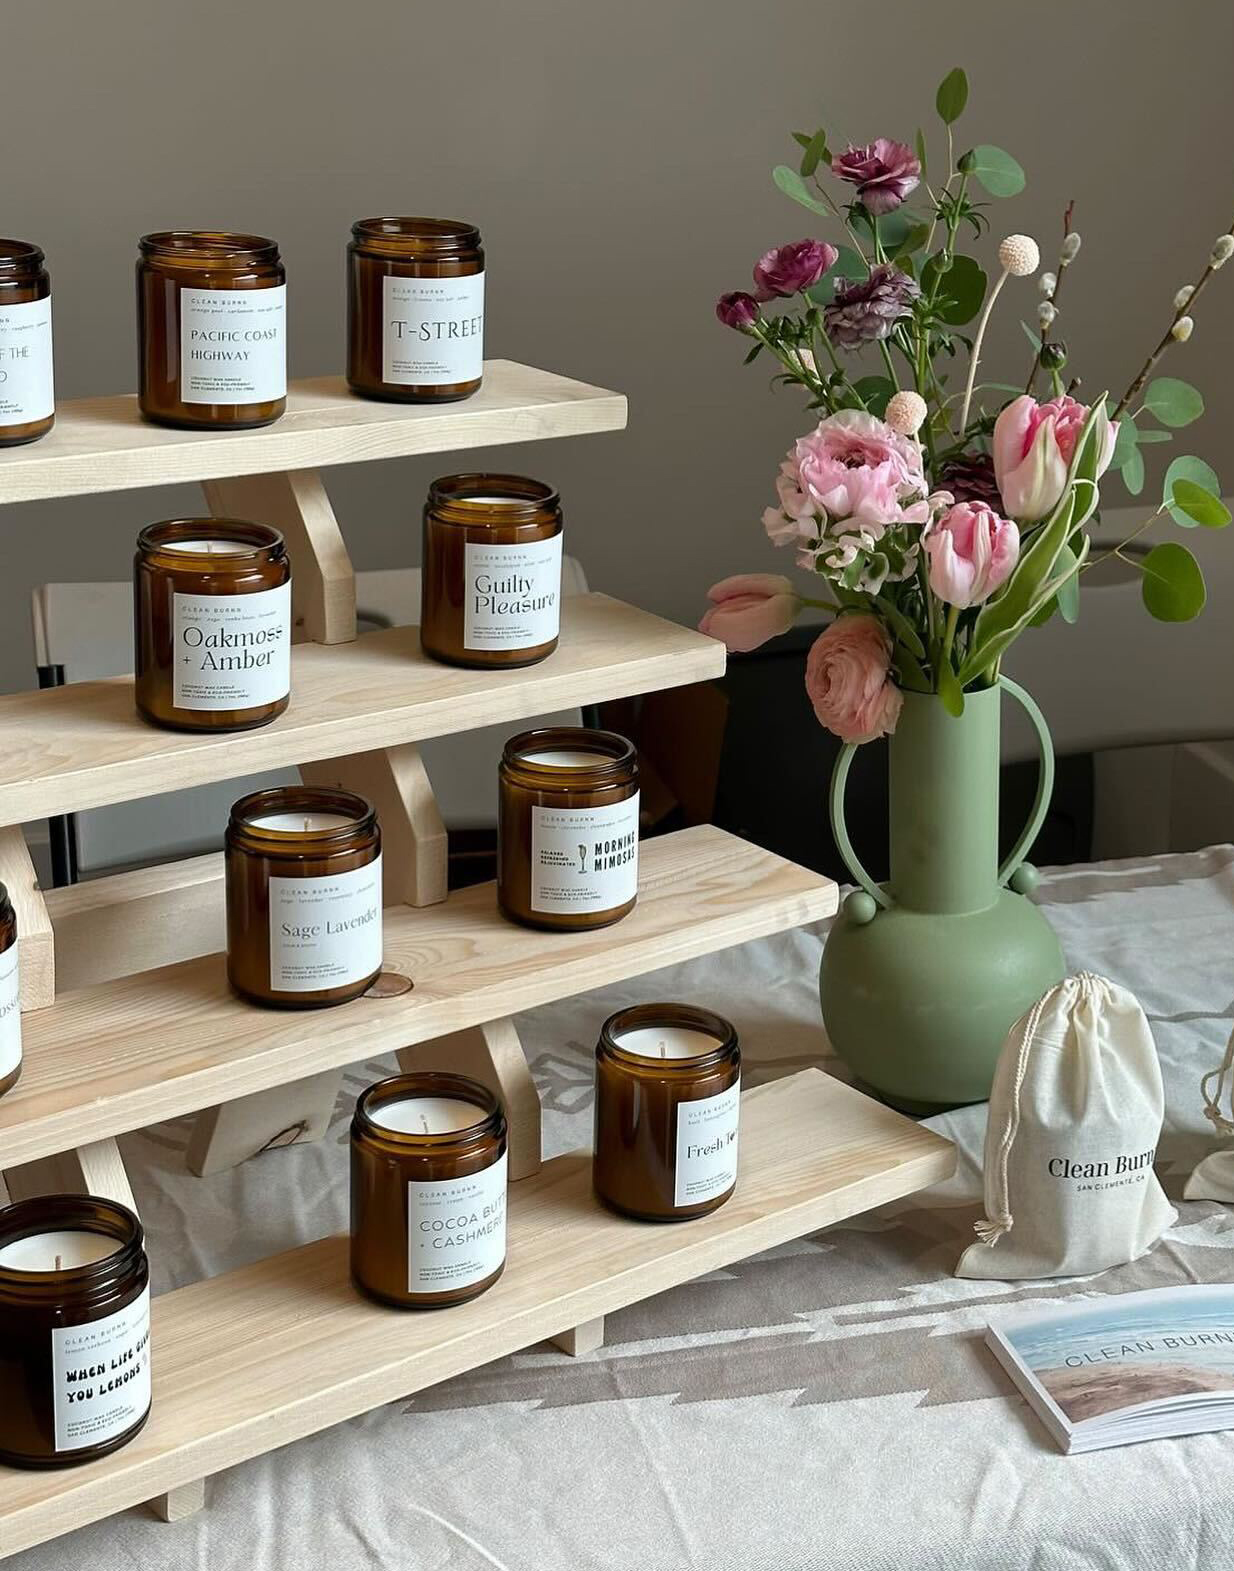 In this cropped image, a four-shelf rise made of natural wood displays soy wax candles made in amber glass jars, shown without lids. To the right of the display is a shapely matte sage green vase with delicate pink and purplee flowers. In front of the vase is a muslin bag, likely containing a candle, stamped with the Clean Burnn brand name. A stack of cards with the Clean Burnn name are in the foreground. The tabletop is covered in a light tan tablecloth with a Native American motif.